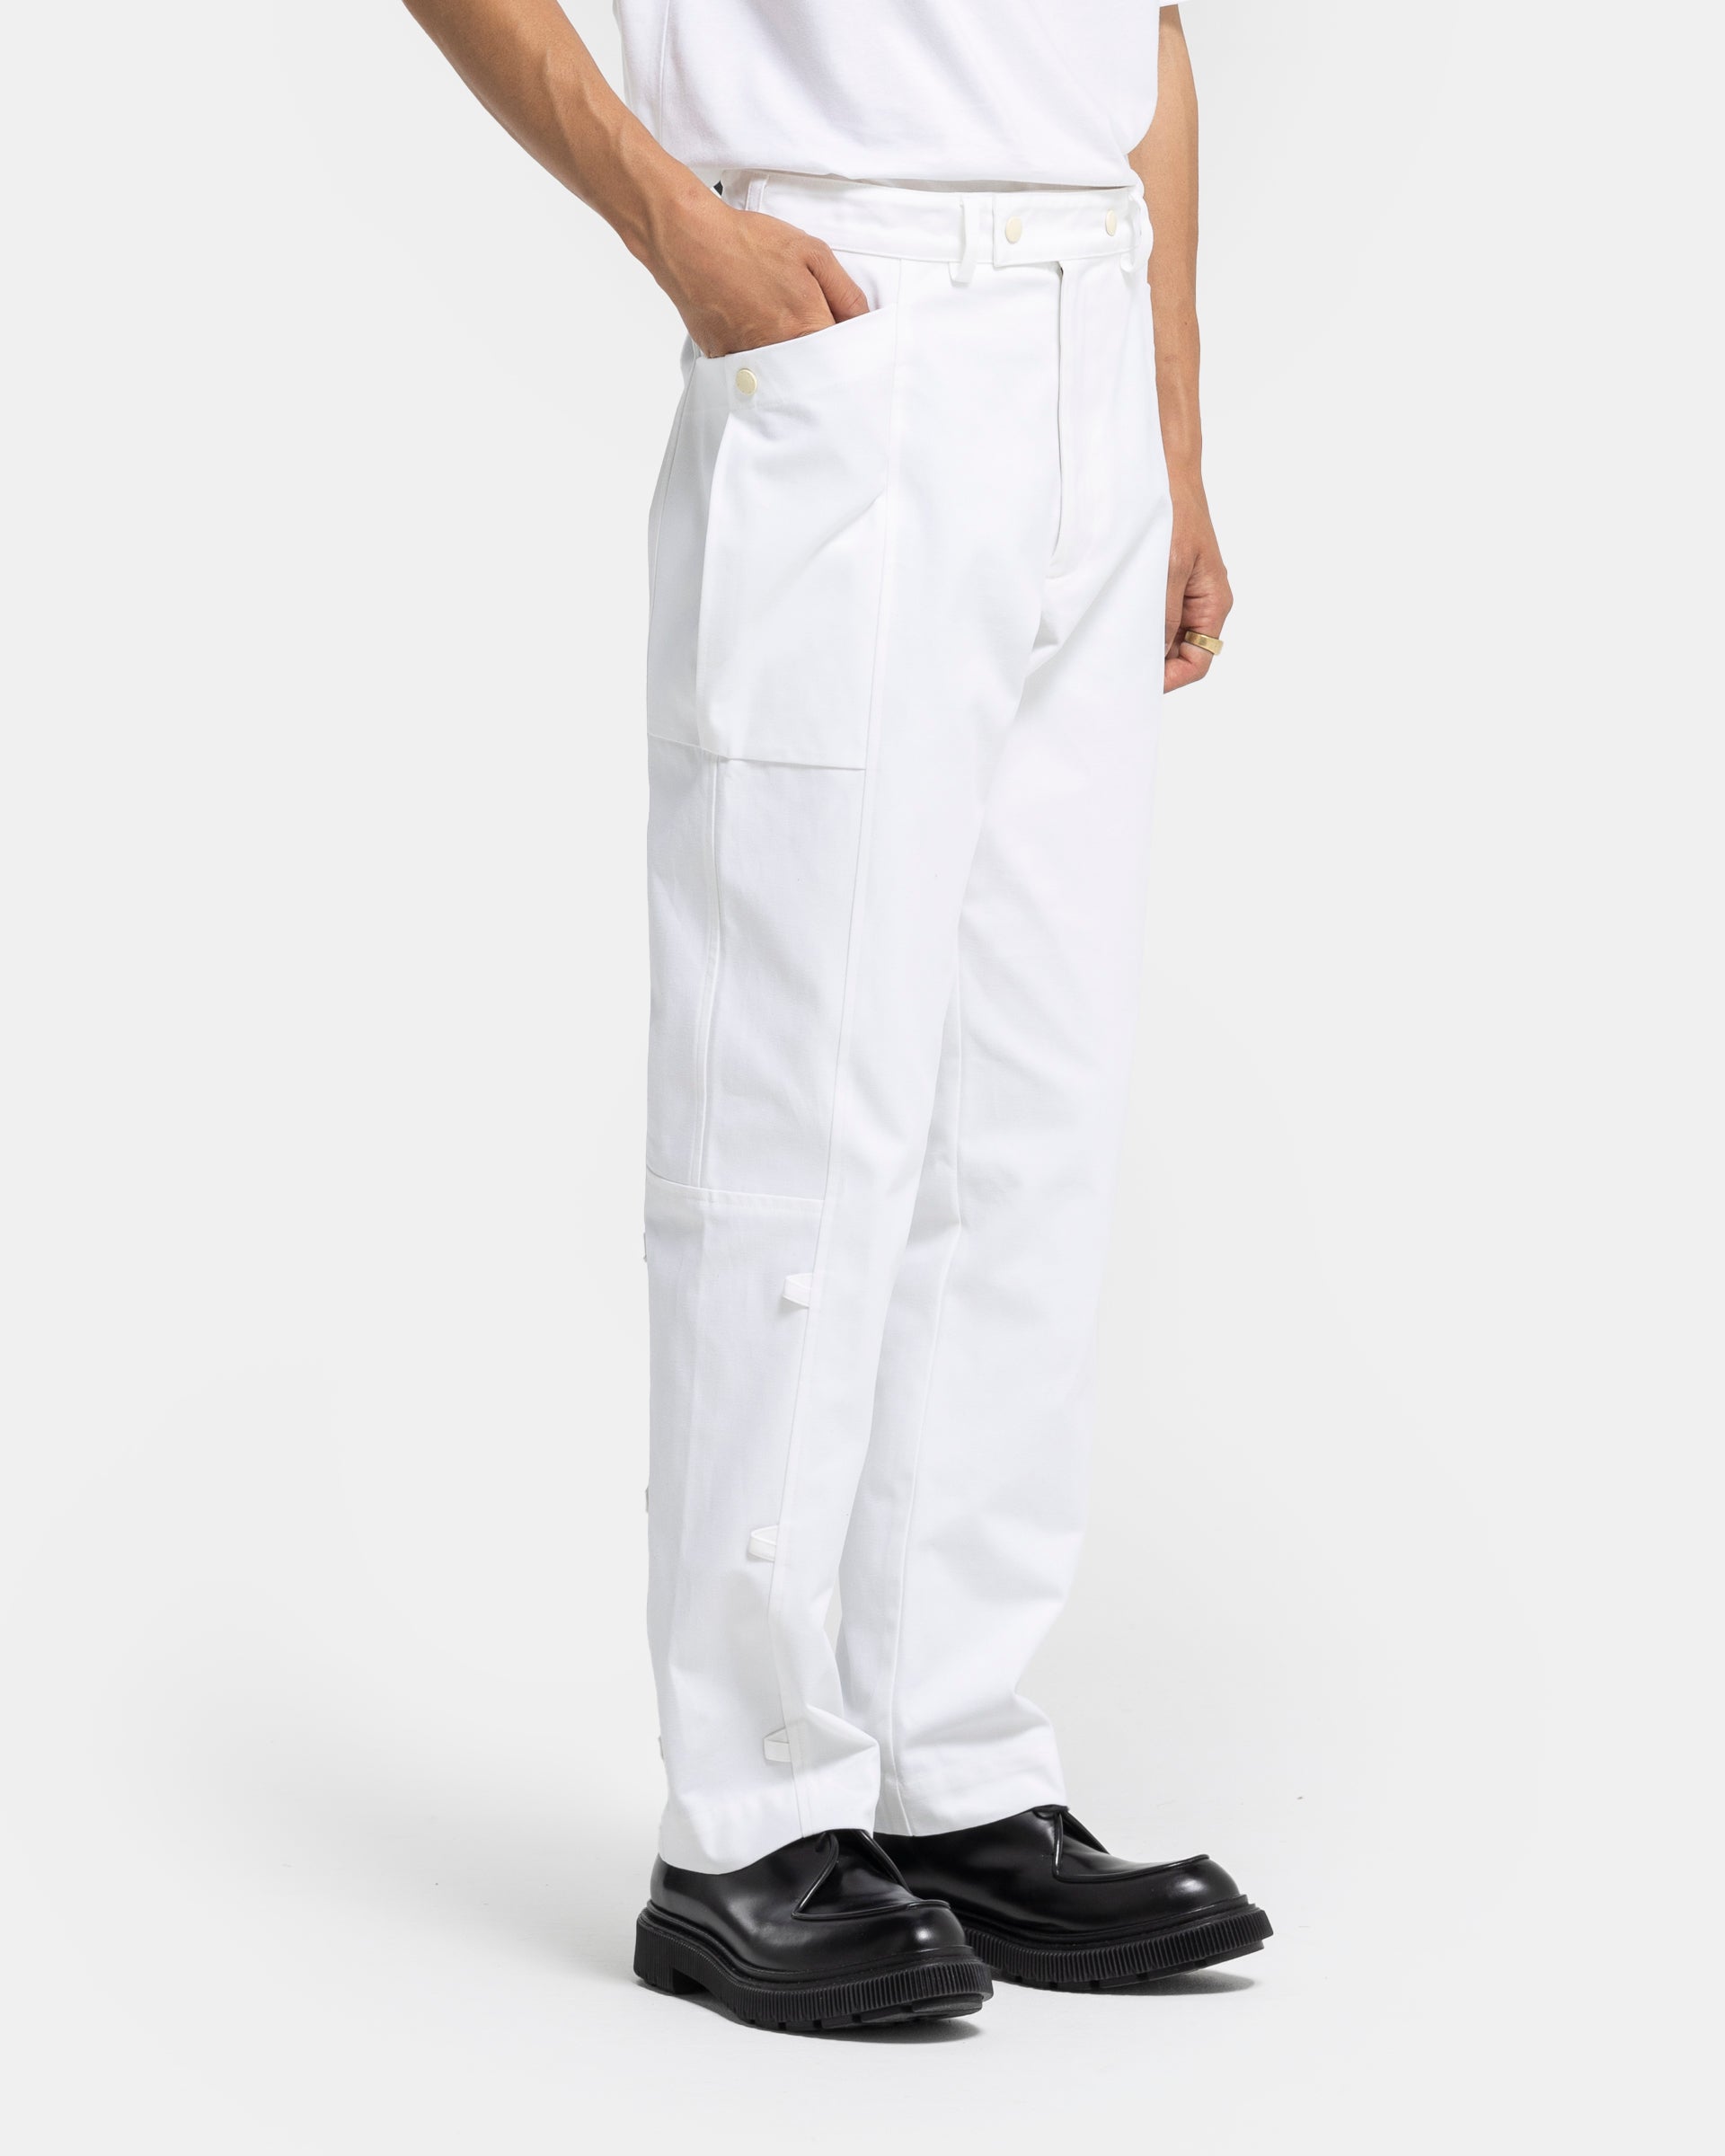 Chippie Trousers in White